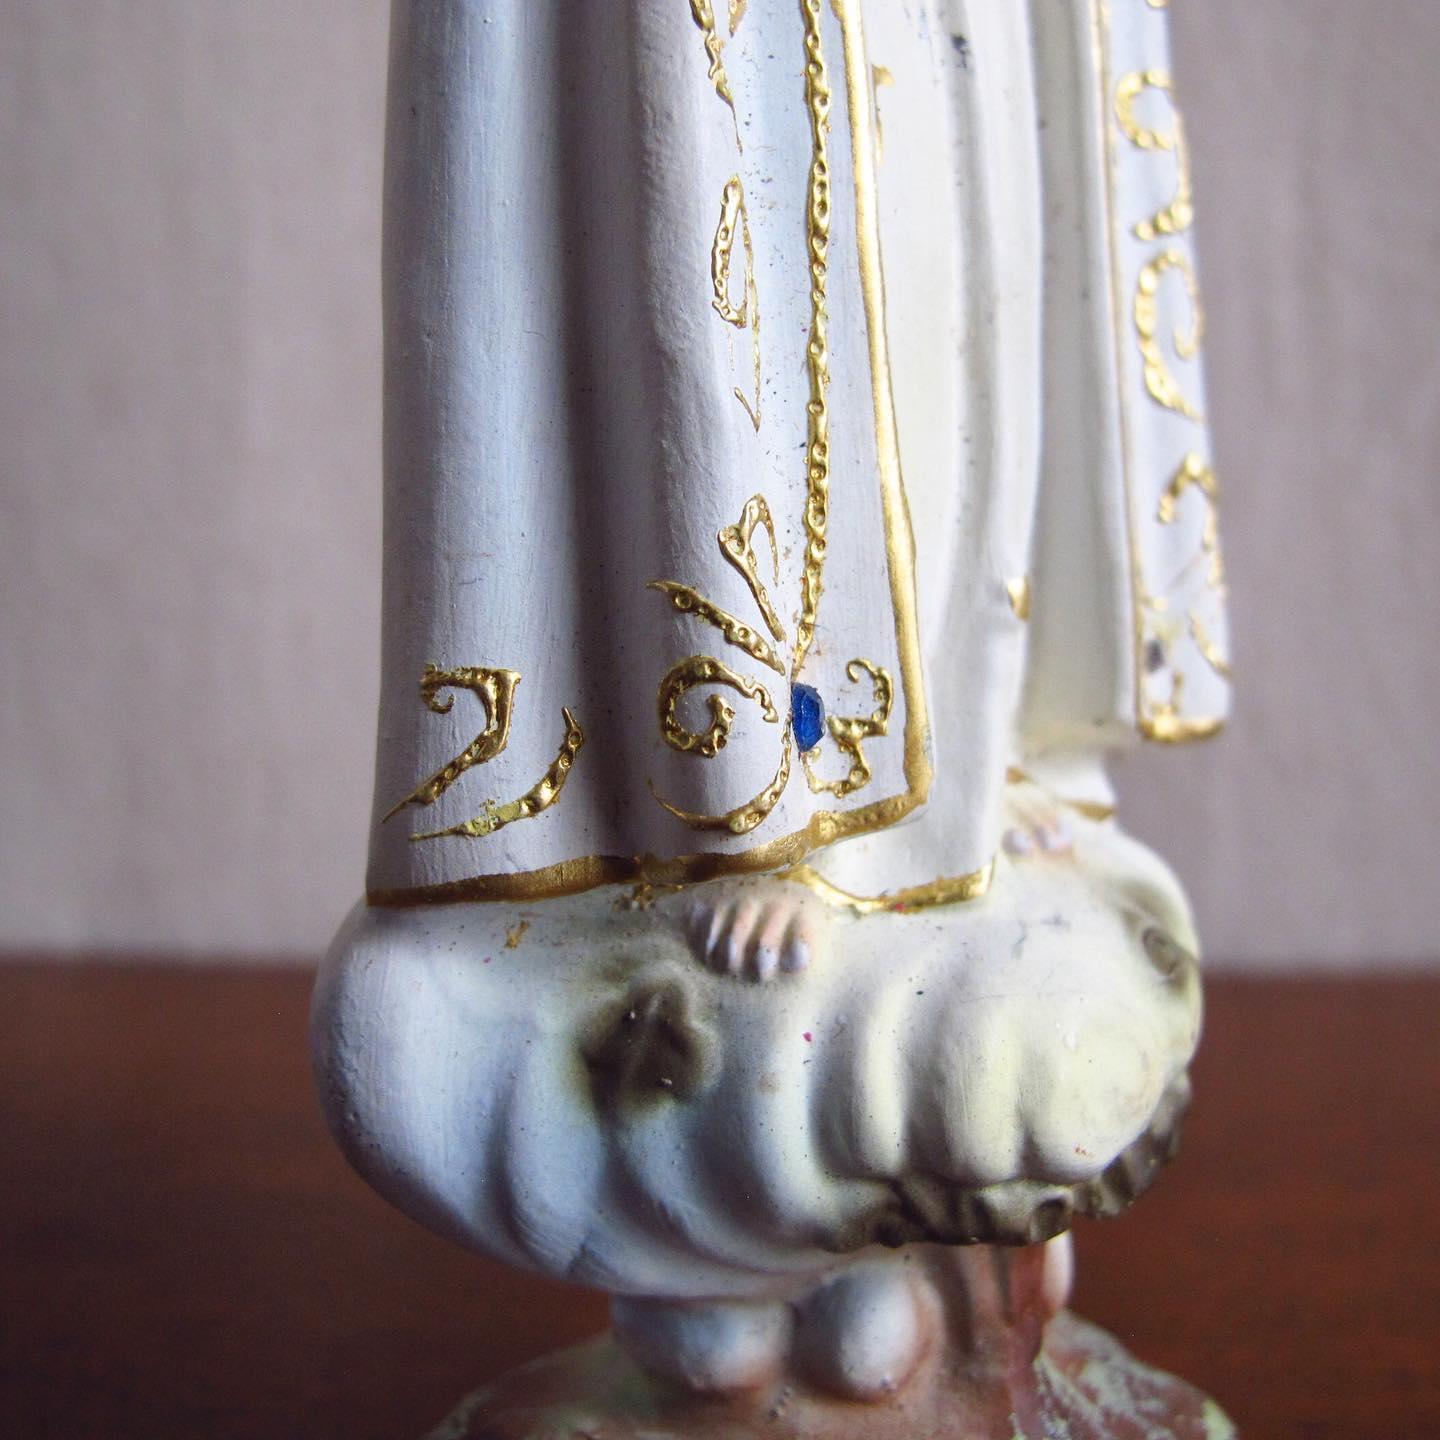 Chalkware or Chalk Madonna with inset glass eyes and scattered jewels, c. 1920